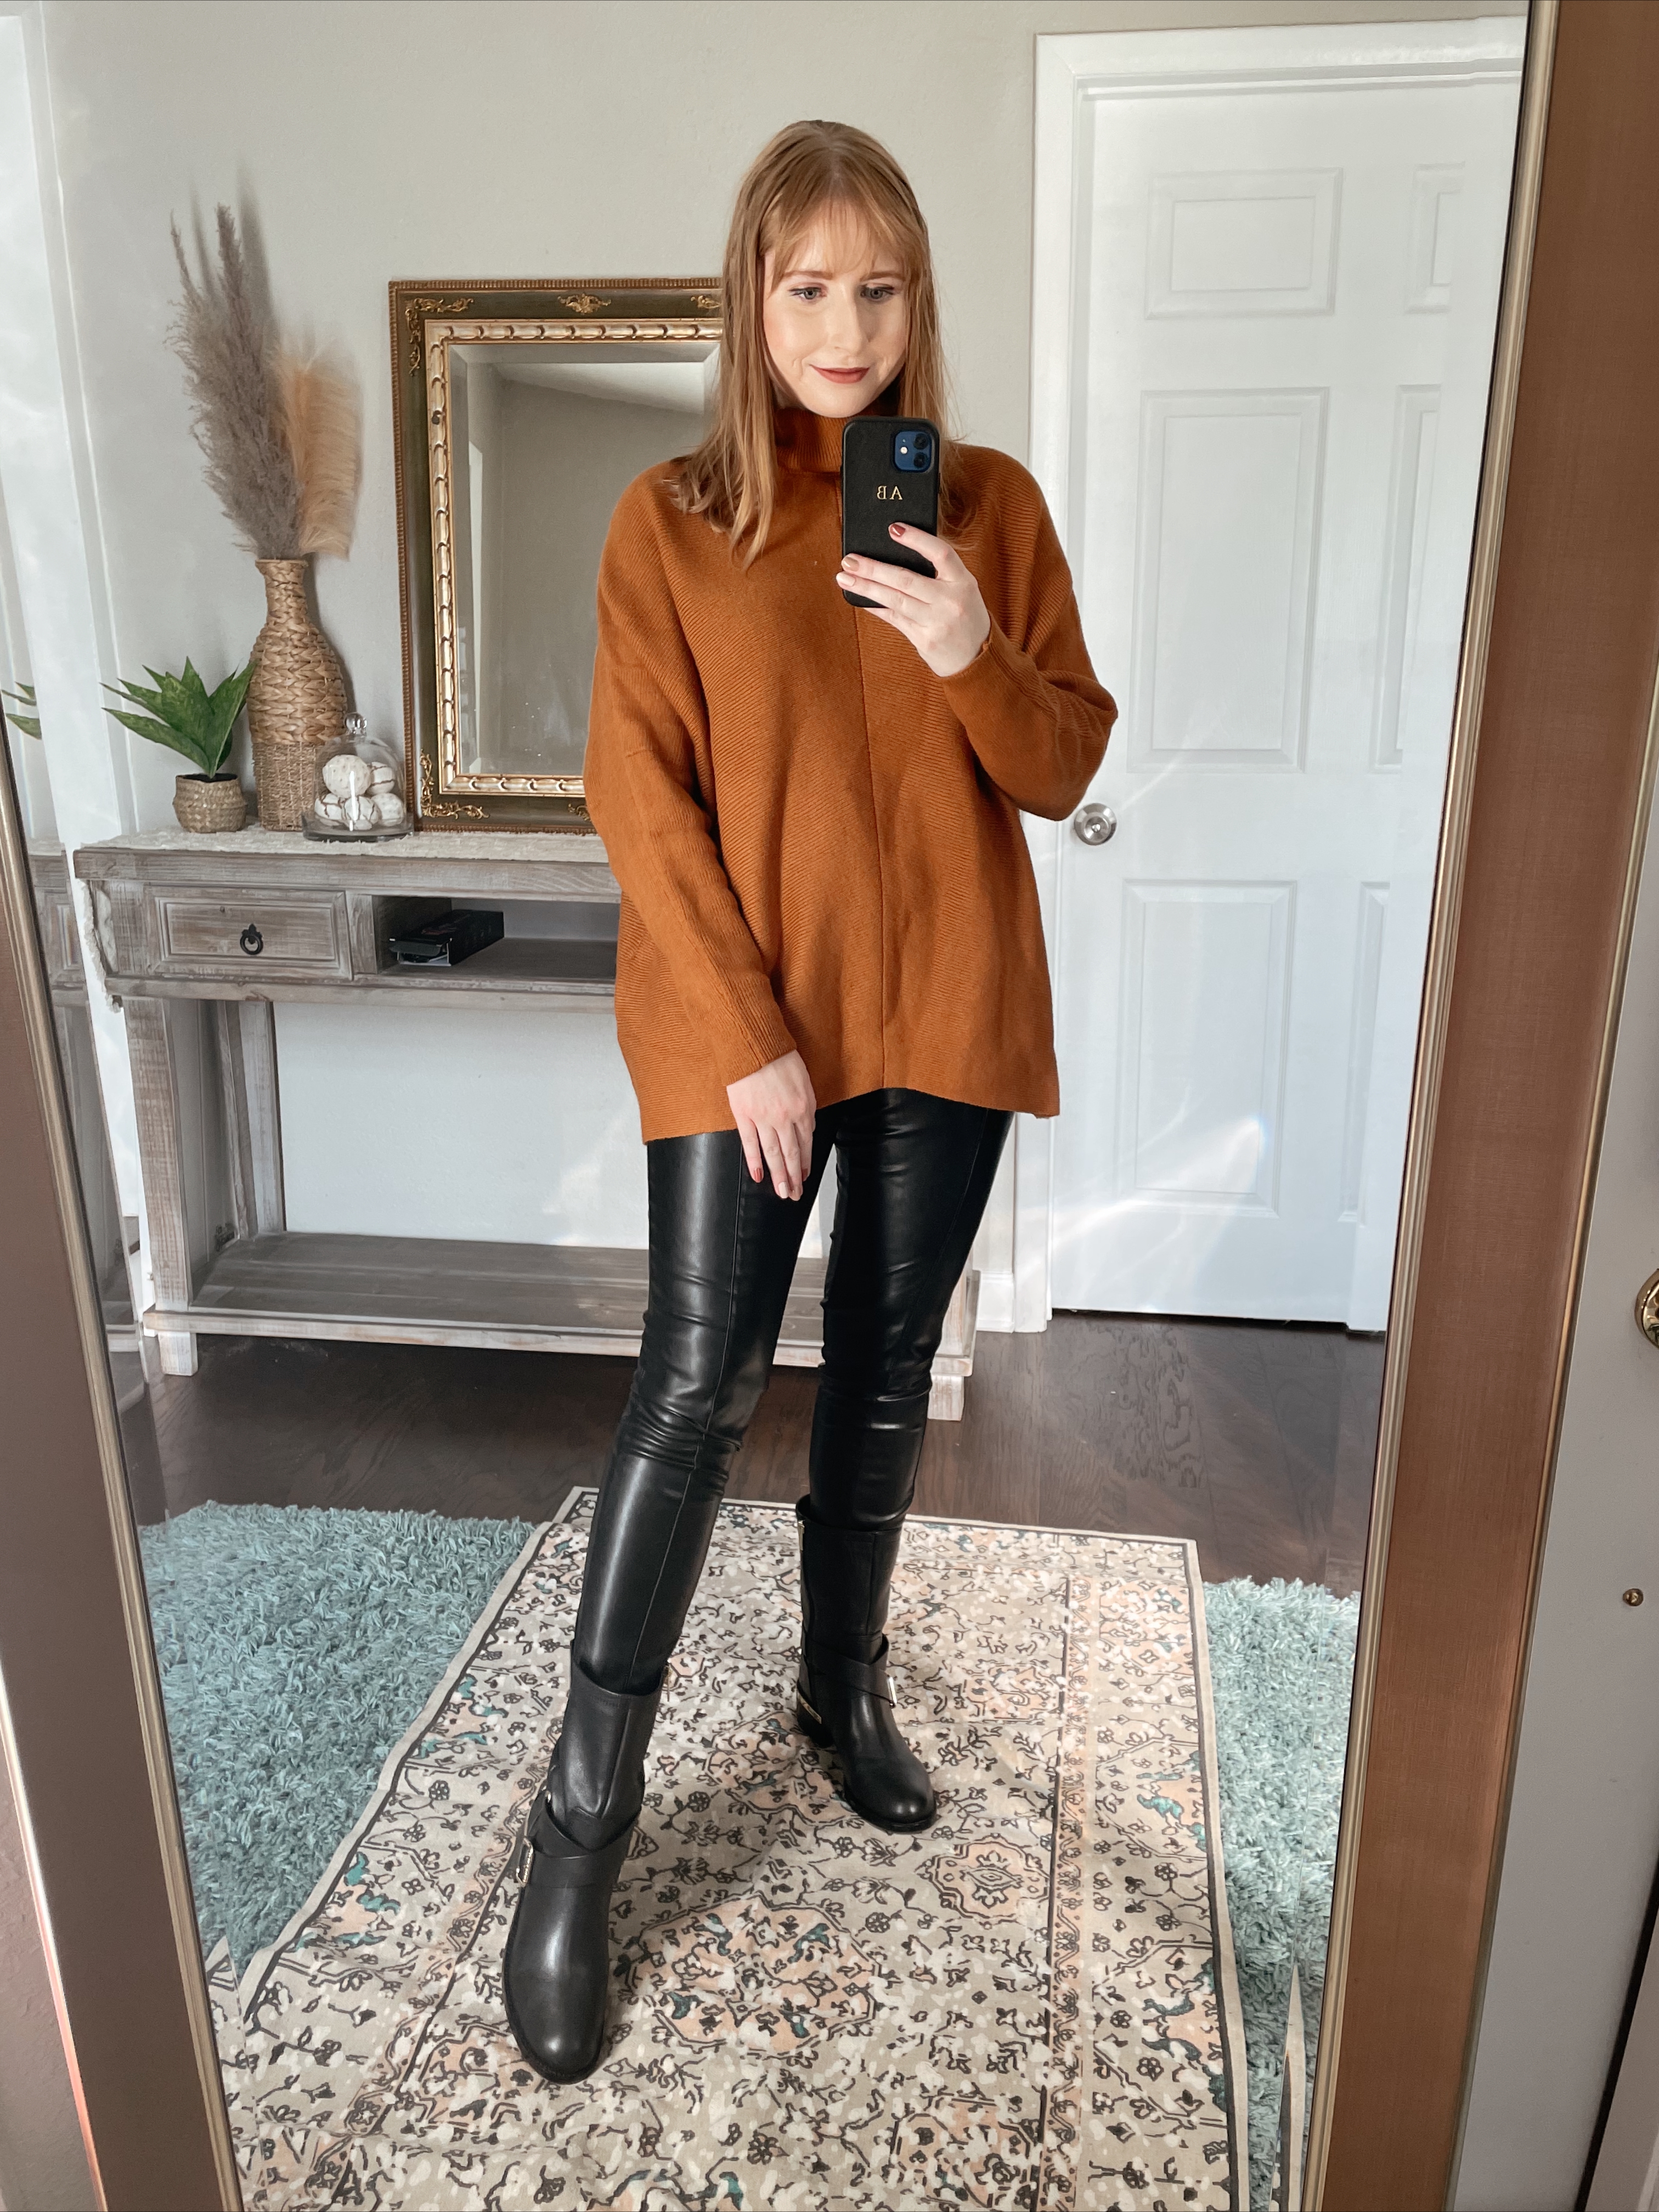 Affordable Amazon Winter Fashion Finds. Best New Amazon Sweaters, Dresses, Chunky Knit Cardigans. Fashion Blogger Amazon Finds.Womens Turtleneck Long Sleeve Sweater Irregular Hem Casual Pullover Knit Tops | Amazon Fashion Finds